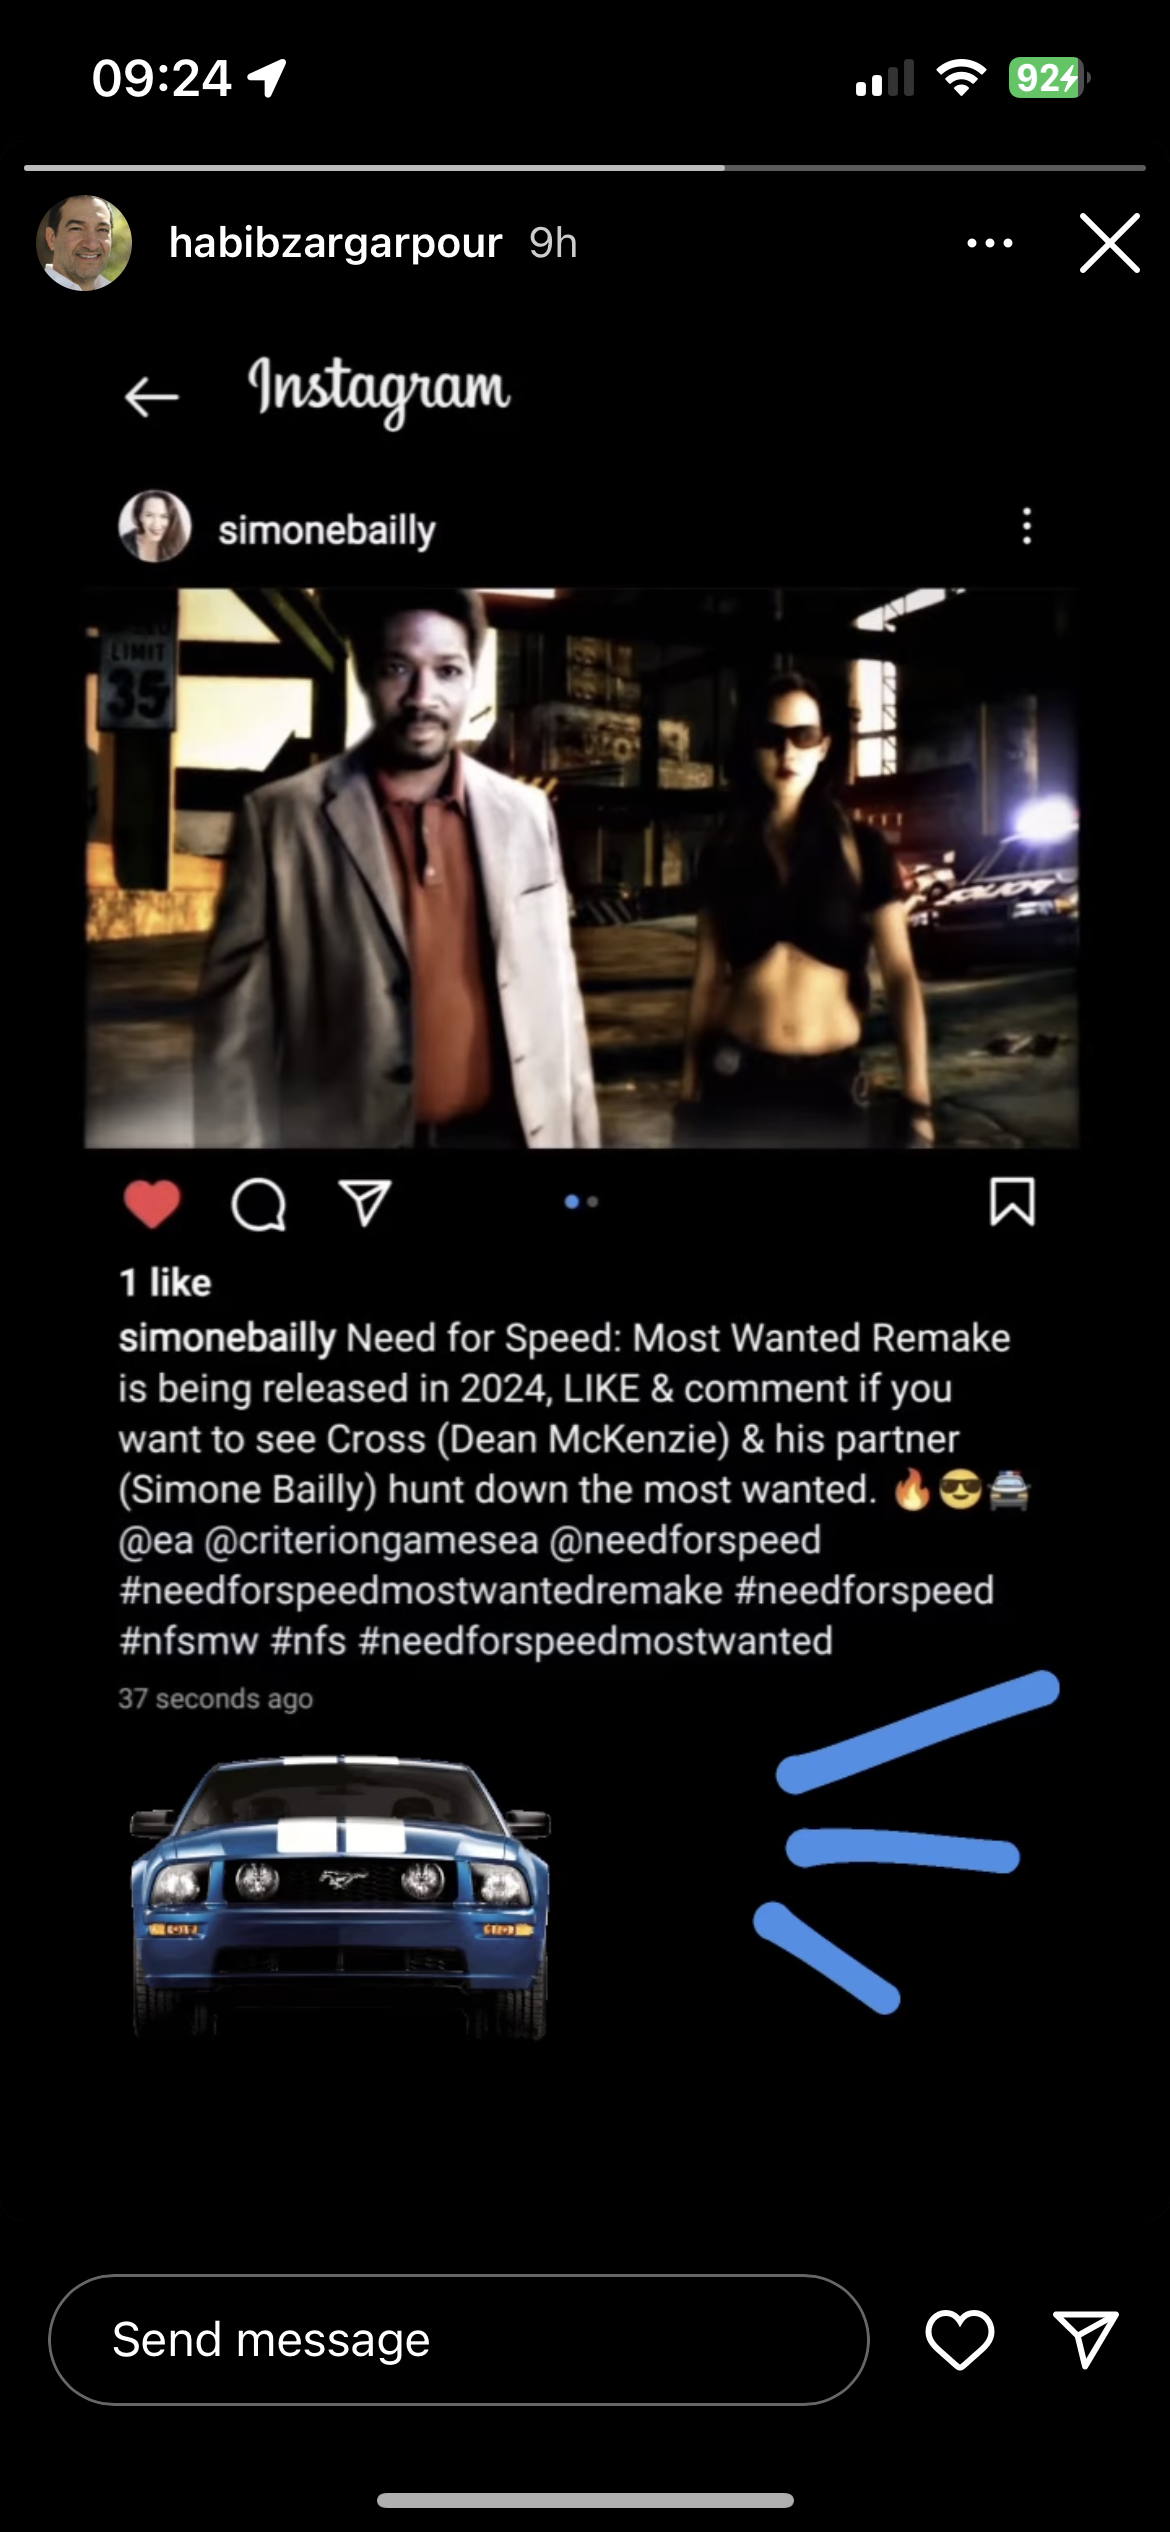 NFS - Need for Speed Most Wanted remake